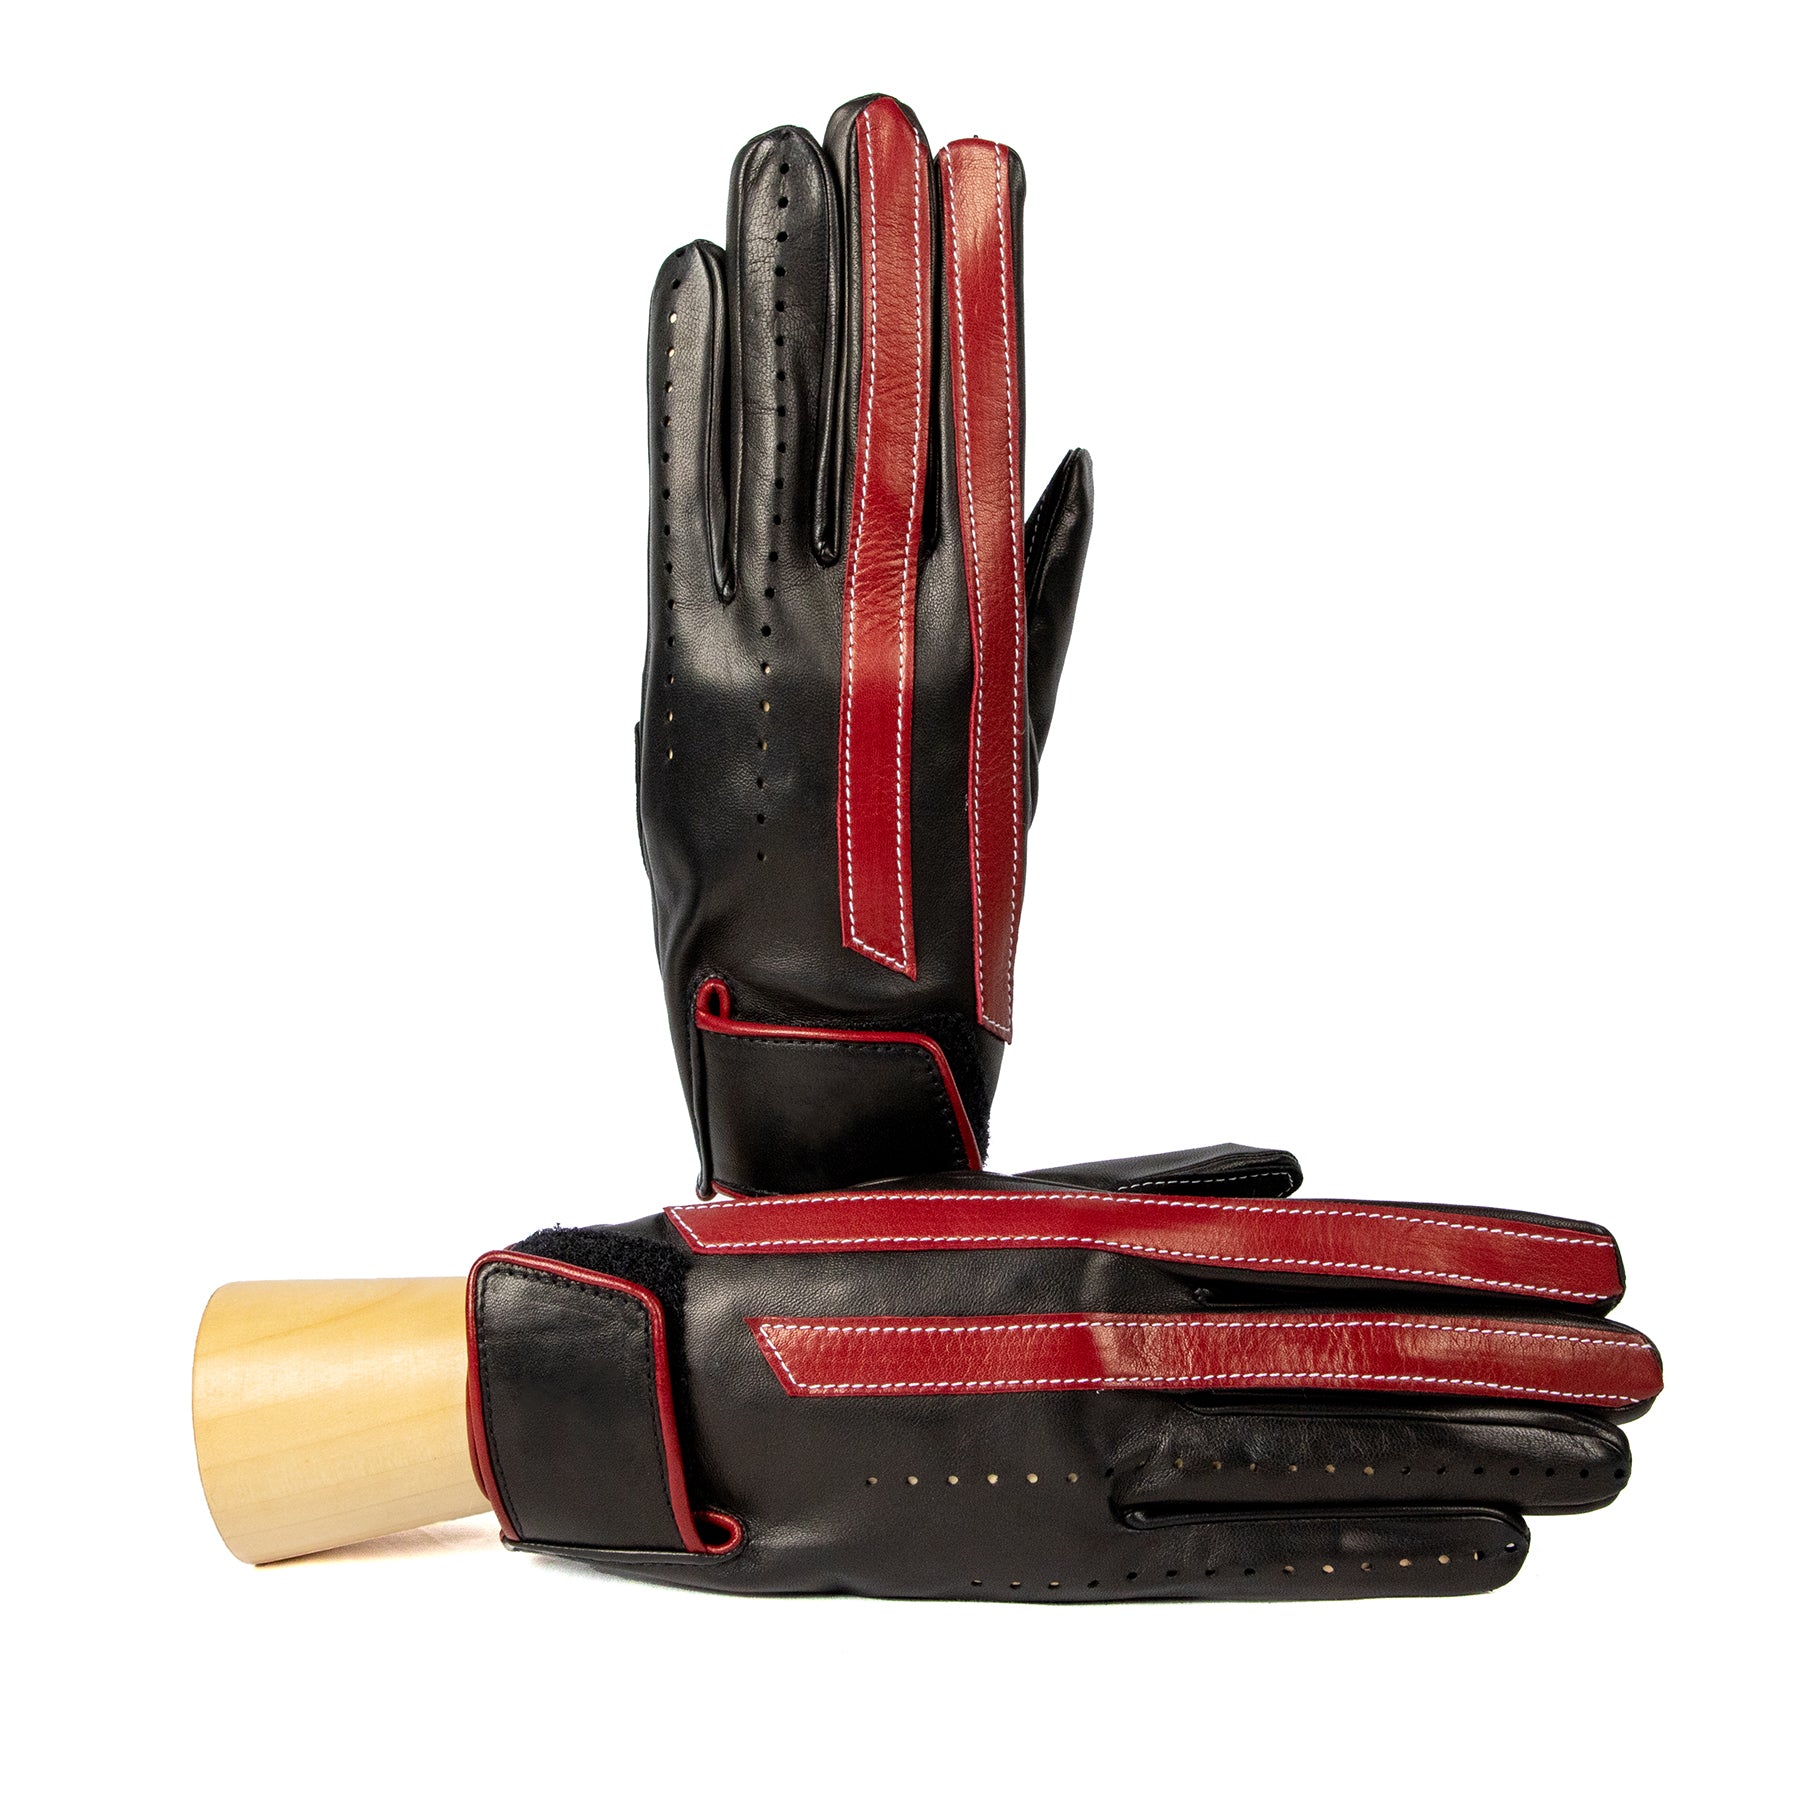 Men's unlined driving gloves in black nappa leather with red leather strips